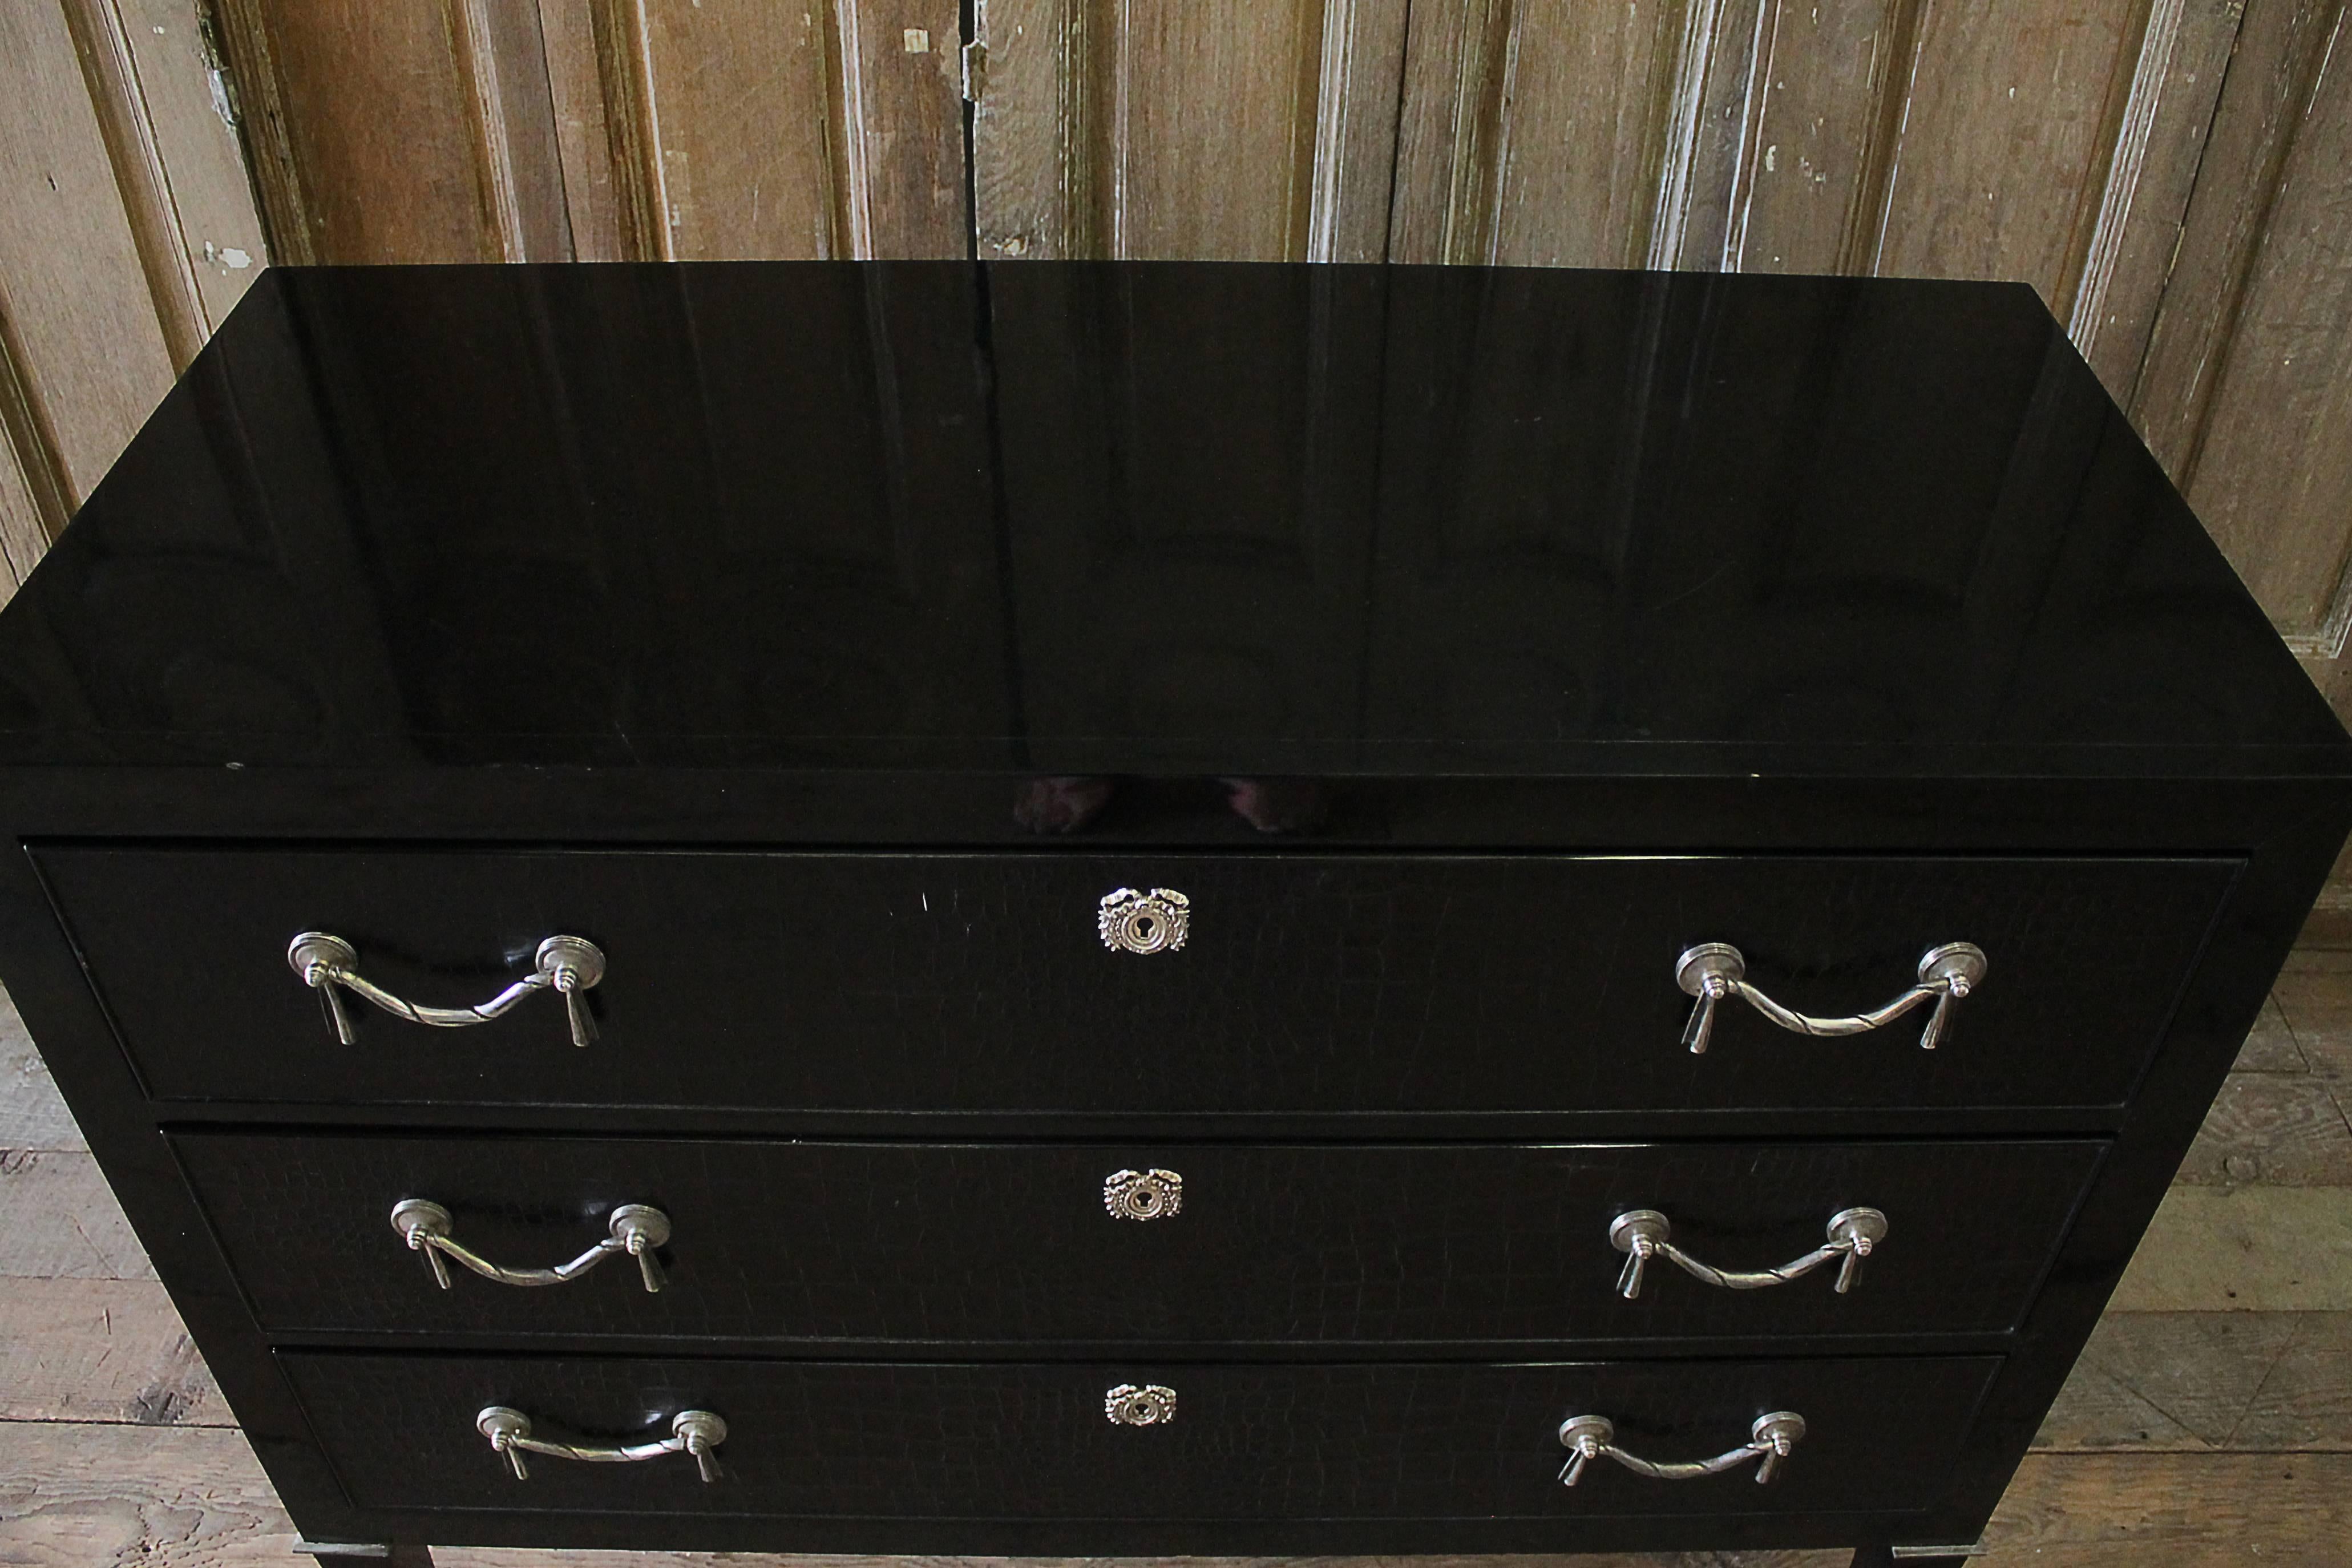 Brook street chest, black
RL Number: 7620-48 piano black with antique silver hardware
MSRP: $11,995
This modern interpretation of an Empire Revival dresser has faux crocodile drawer fronts with antiqued silver garland pulls and